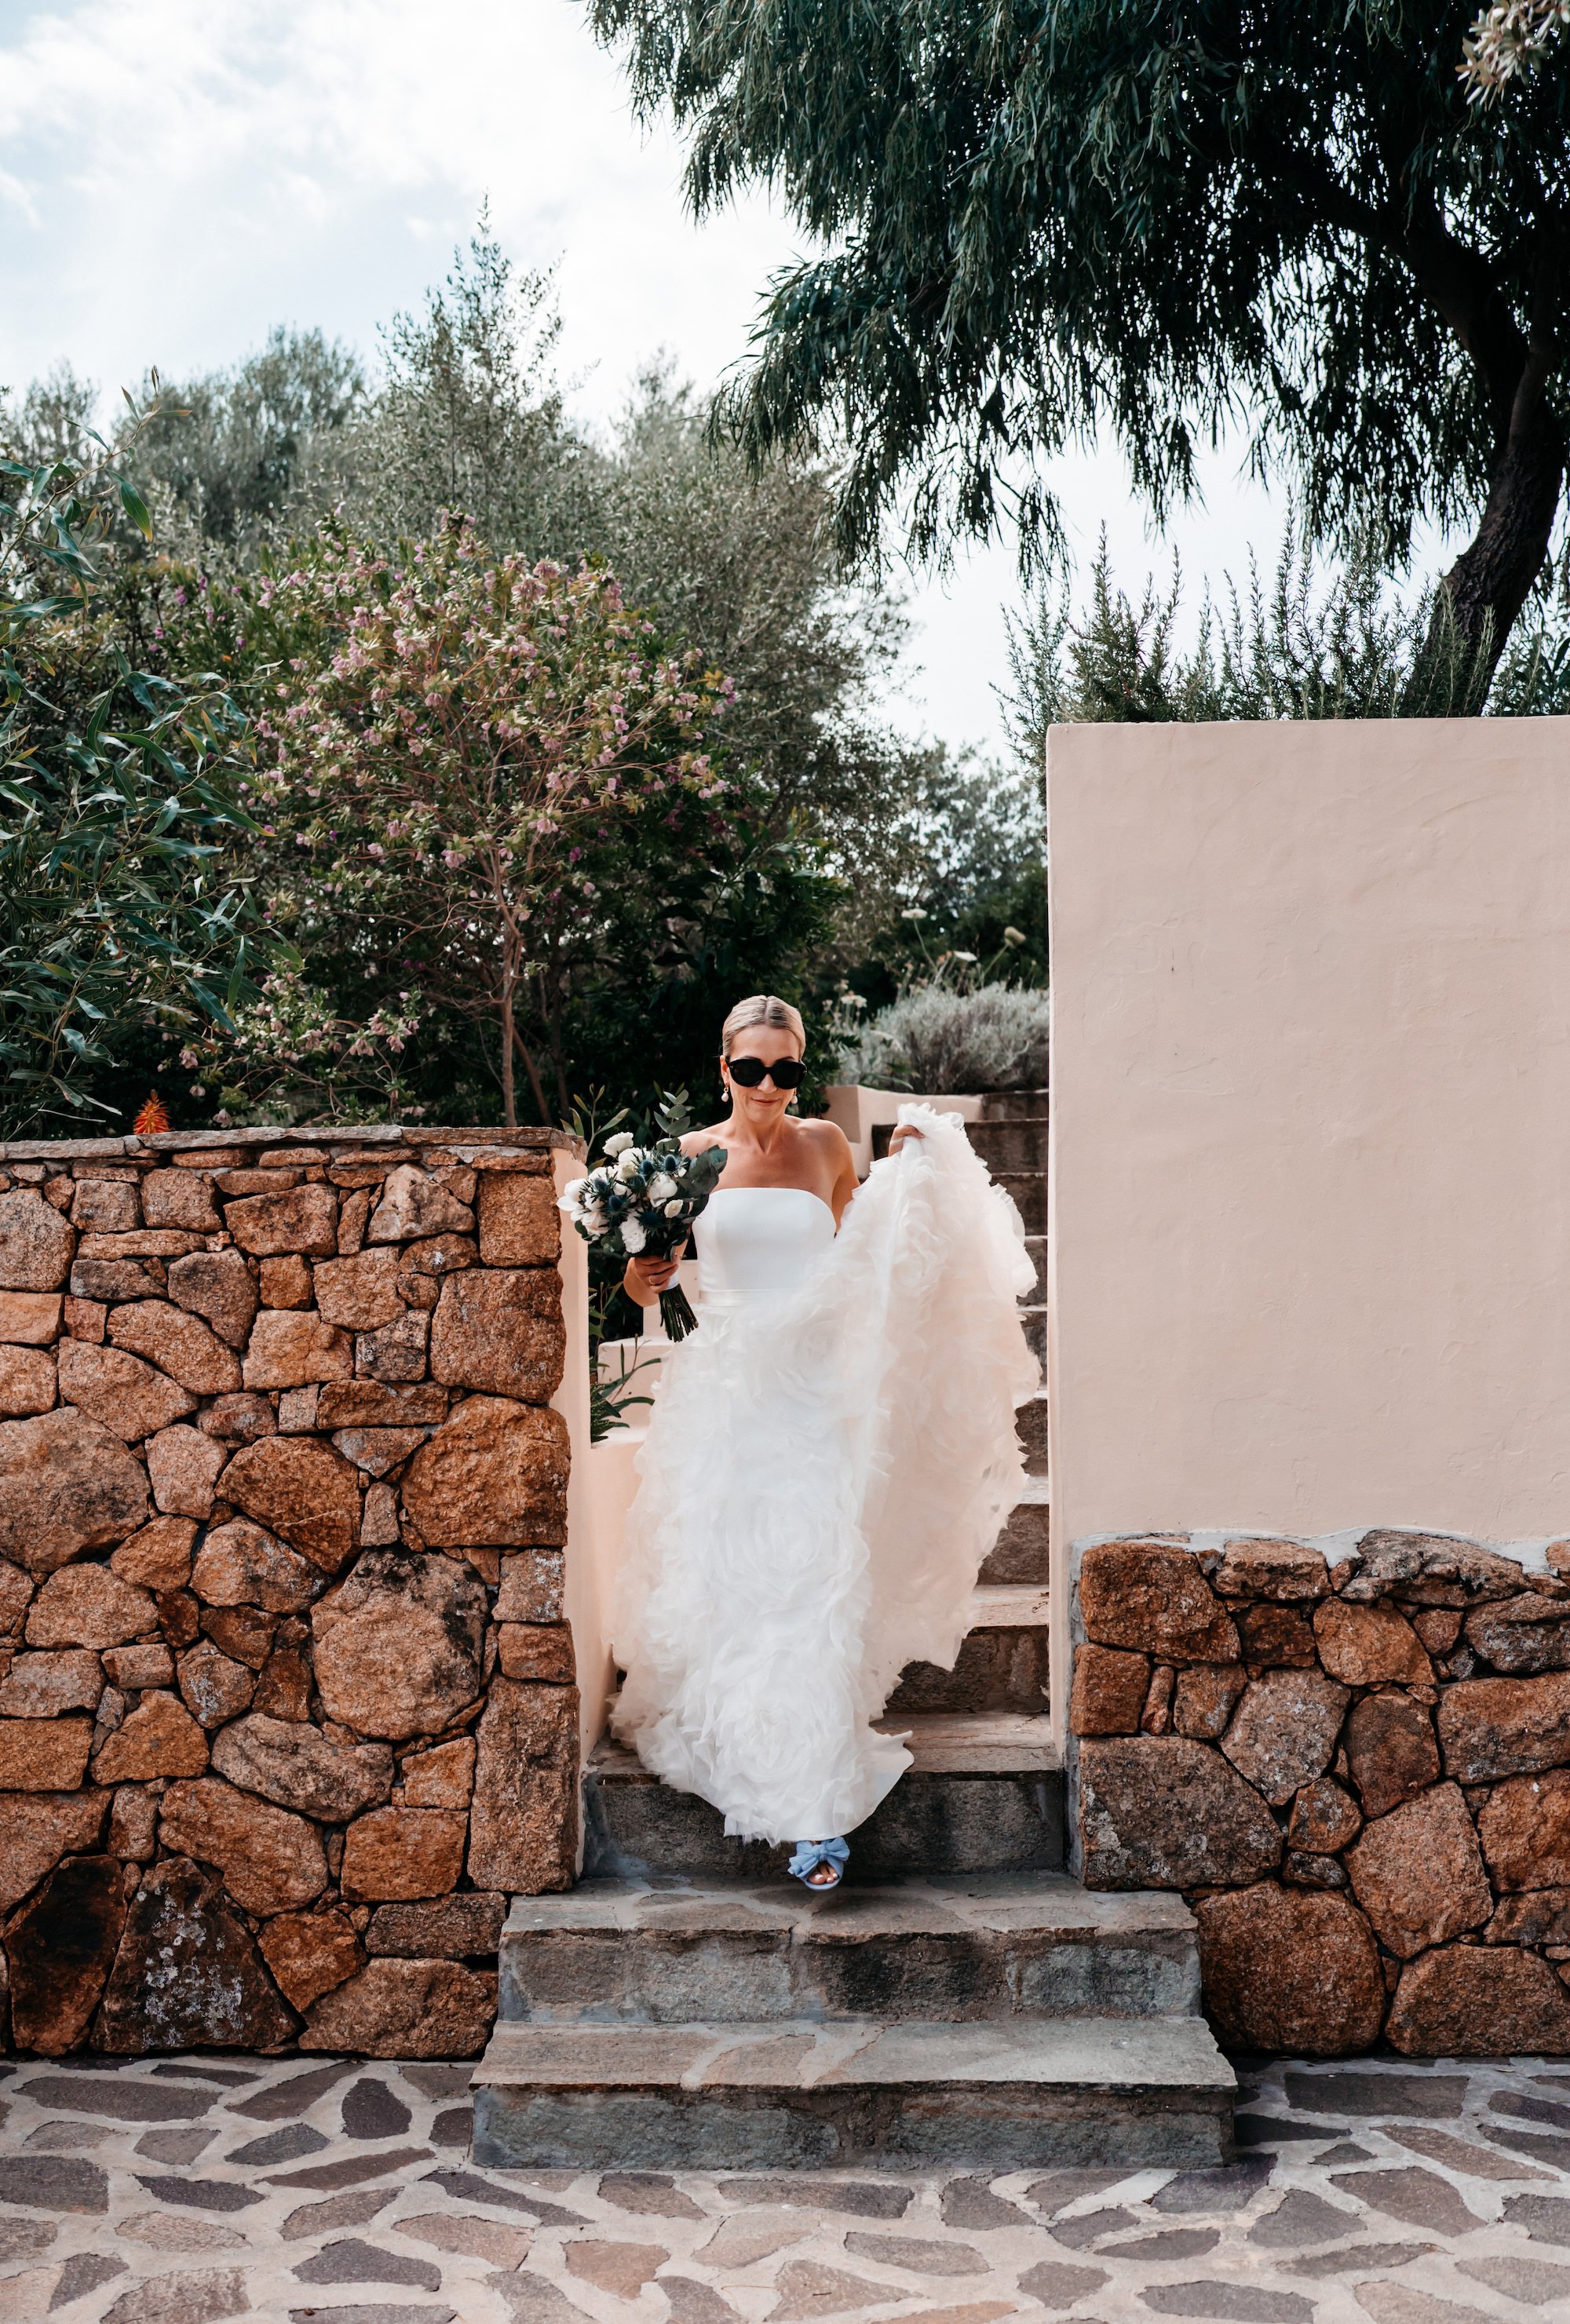 Beautiful bride Florence wore the Oliver wedding dress and Ruffle Rose skirt by Halfpenny London